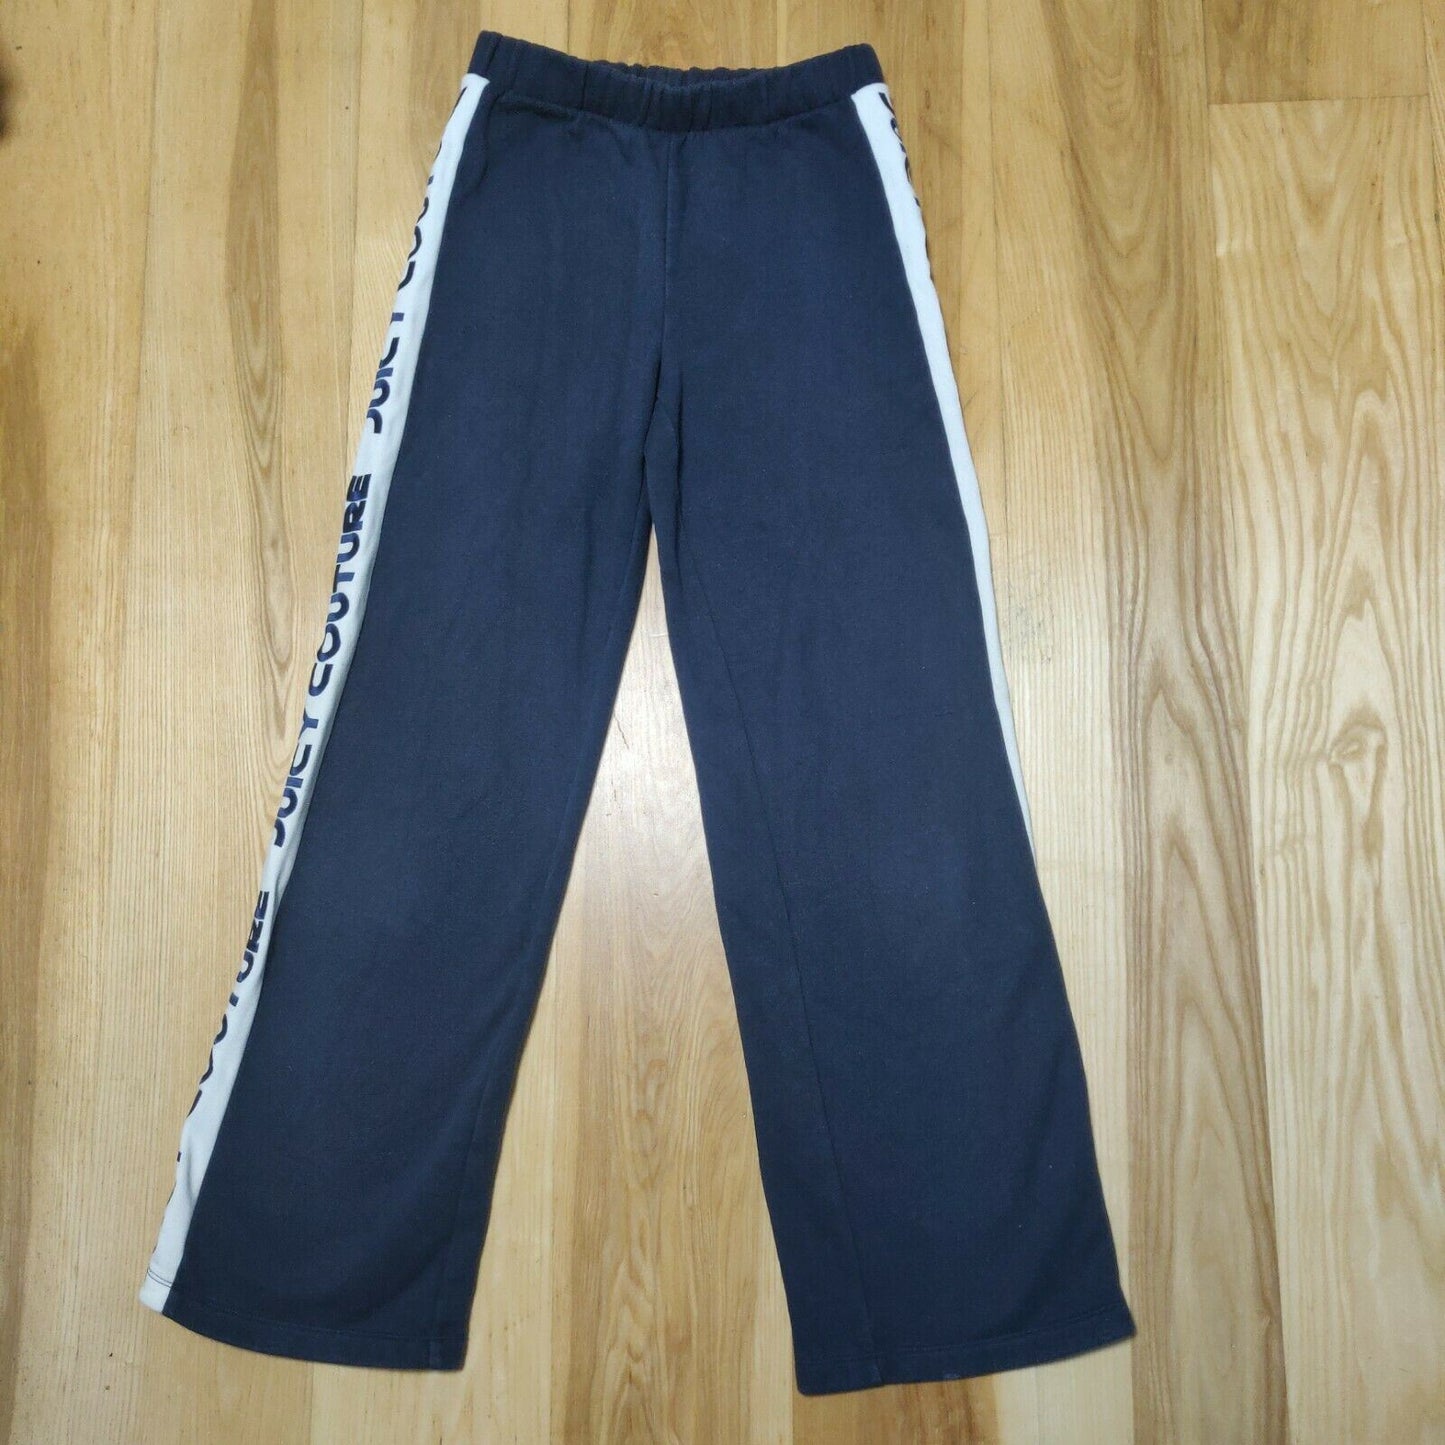 Juicy Couture Black Label Navy Joggers Women Size Small